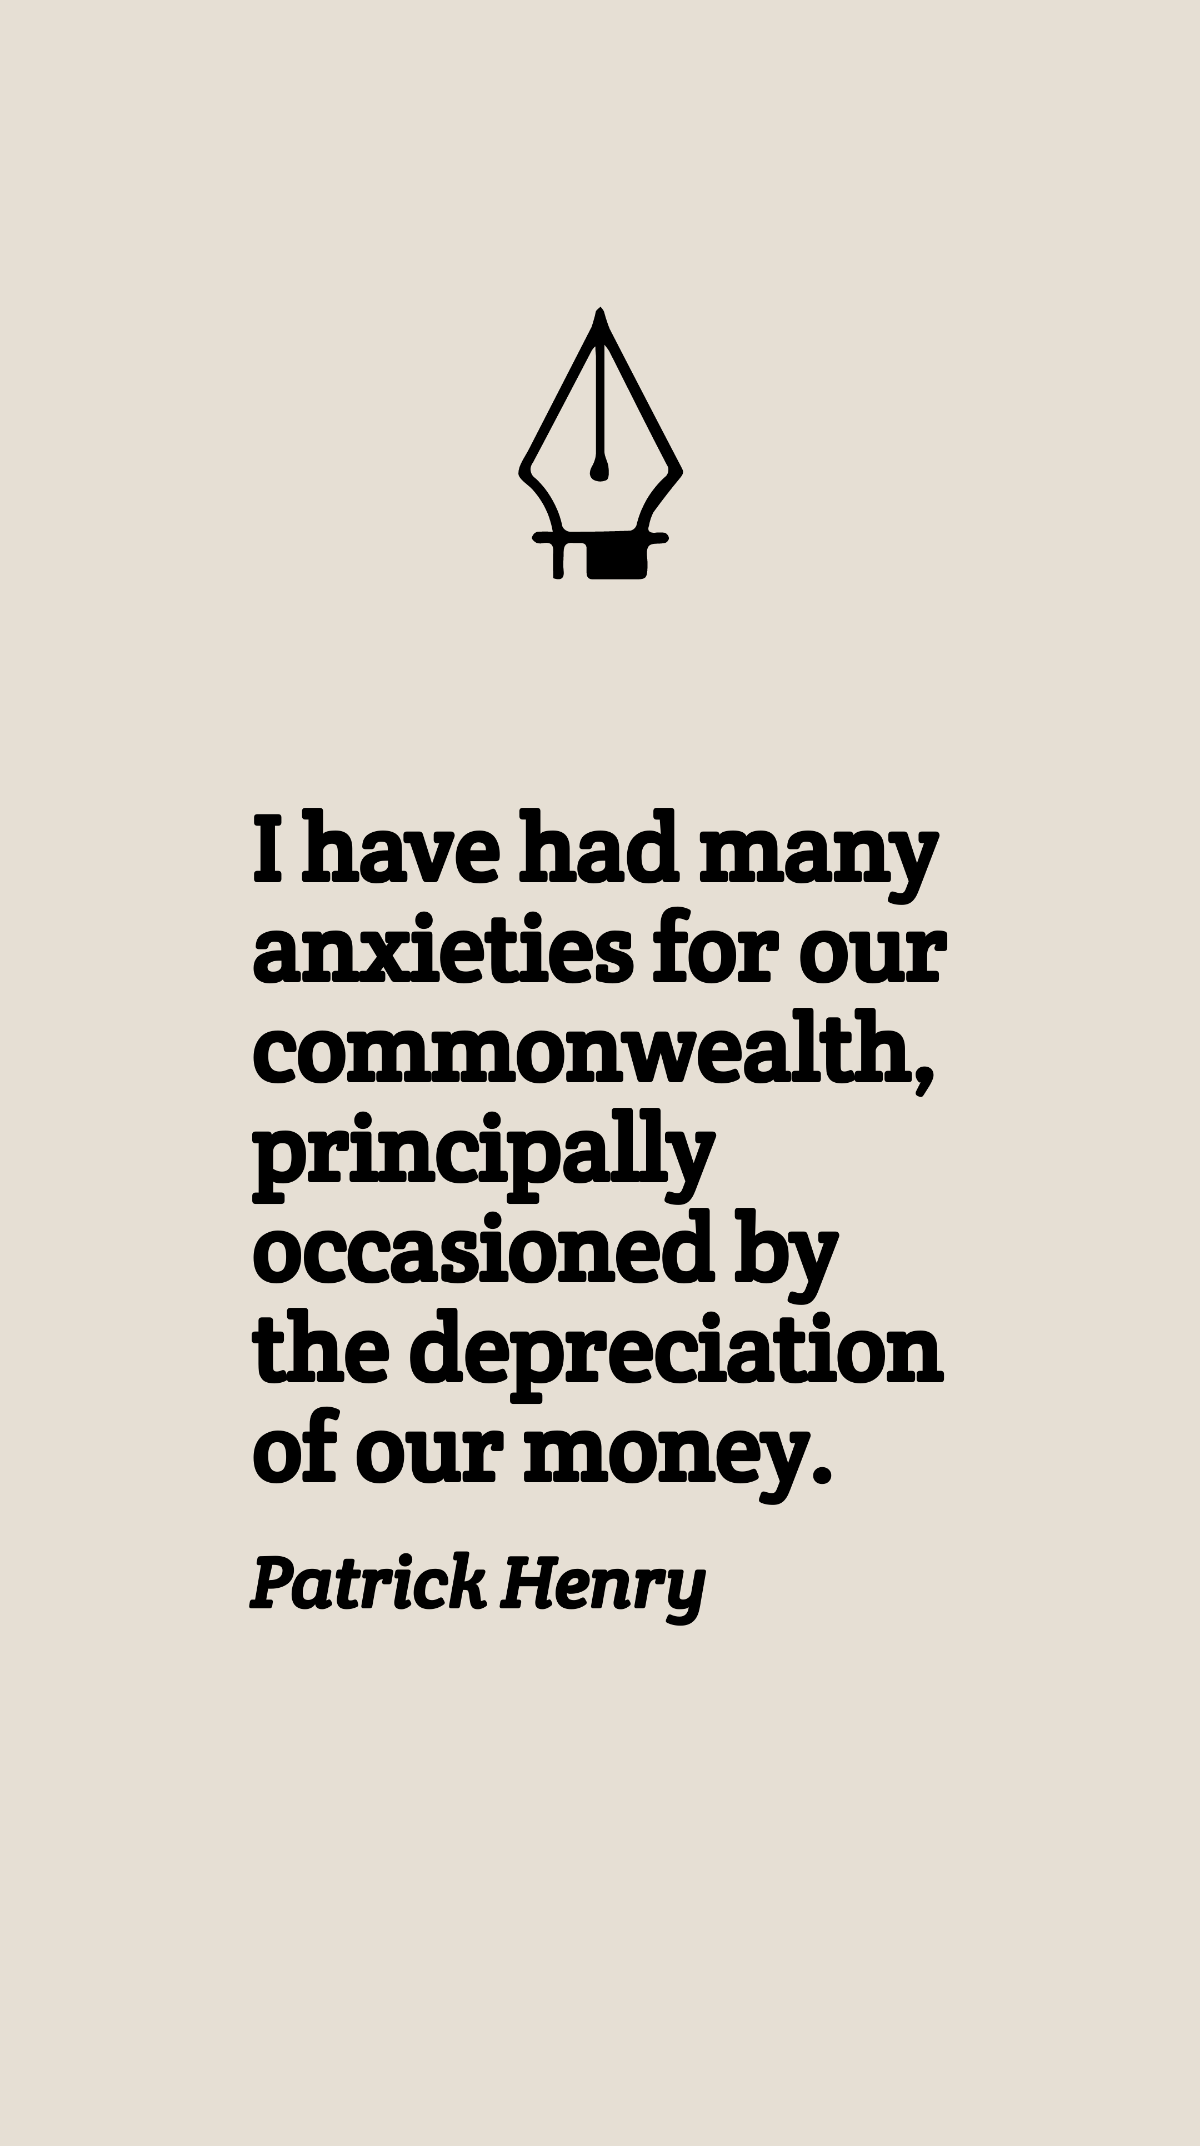 Patrick Henry - I have had many anxieties for our commonwealth, principally occasioned by the depreciation of our money. Template